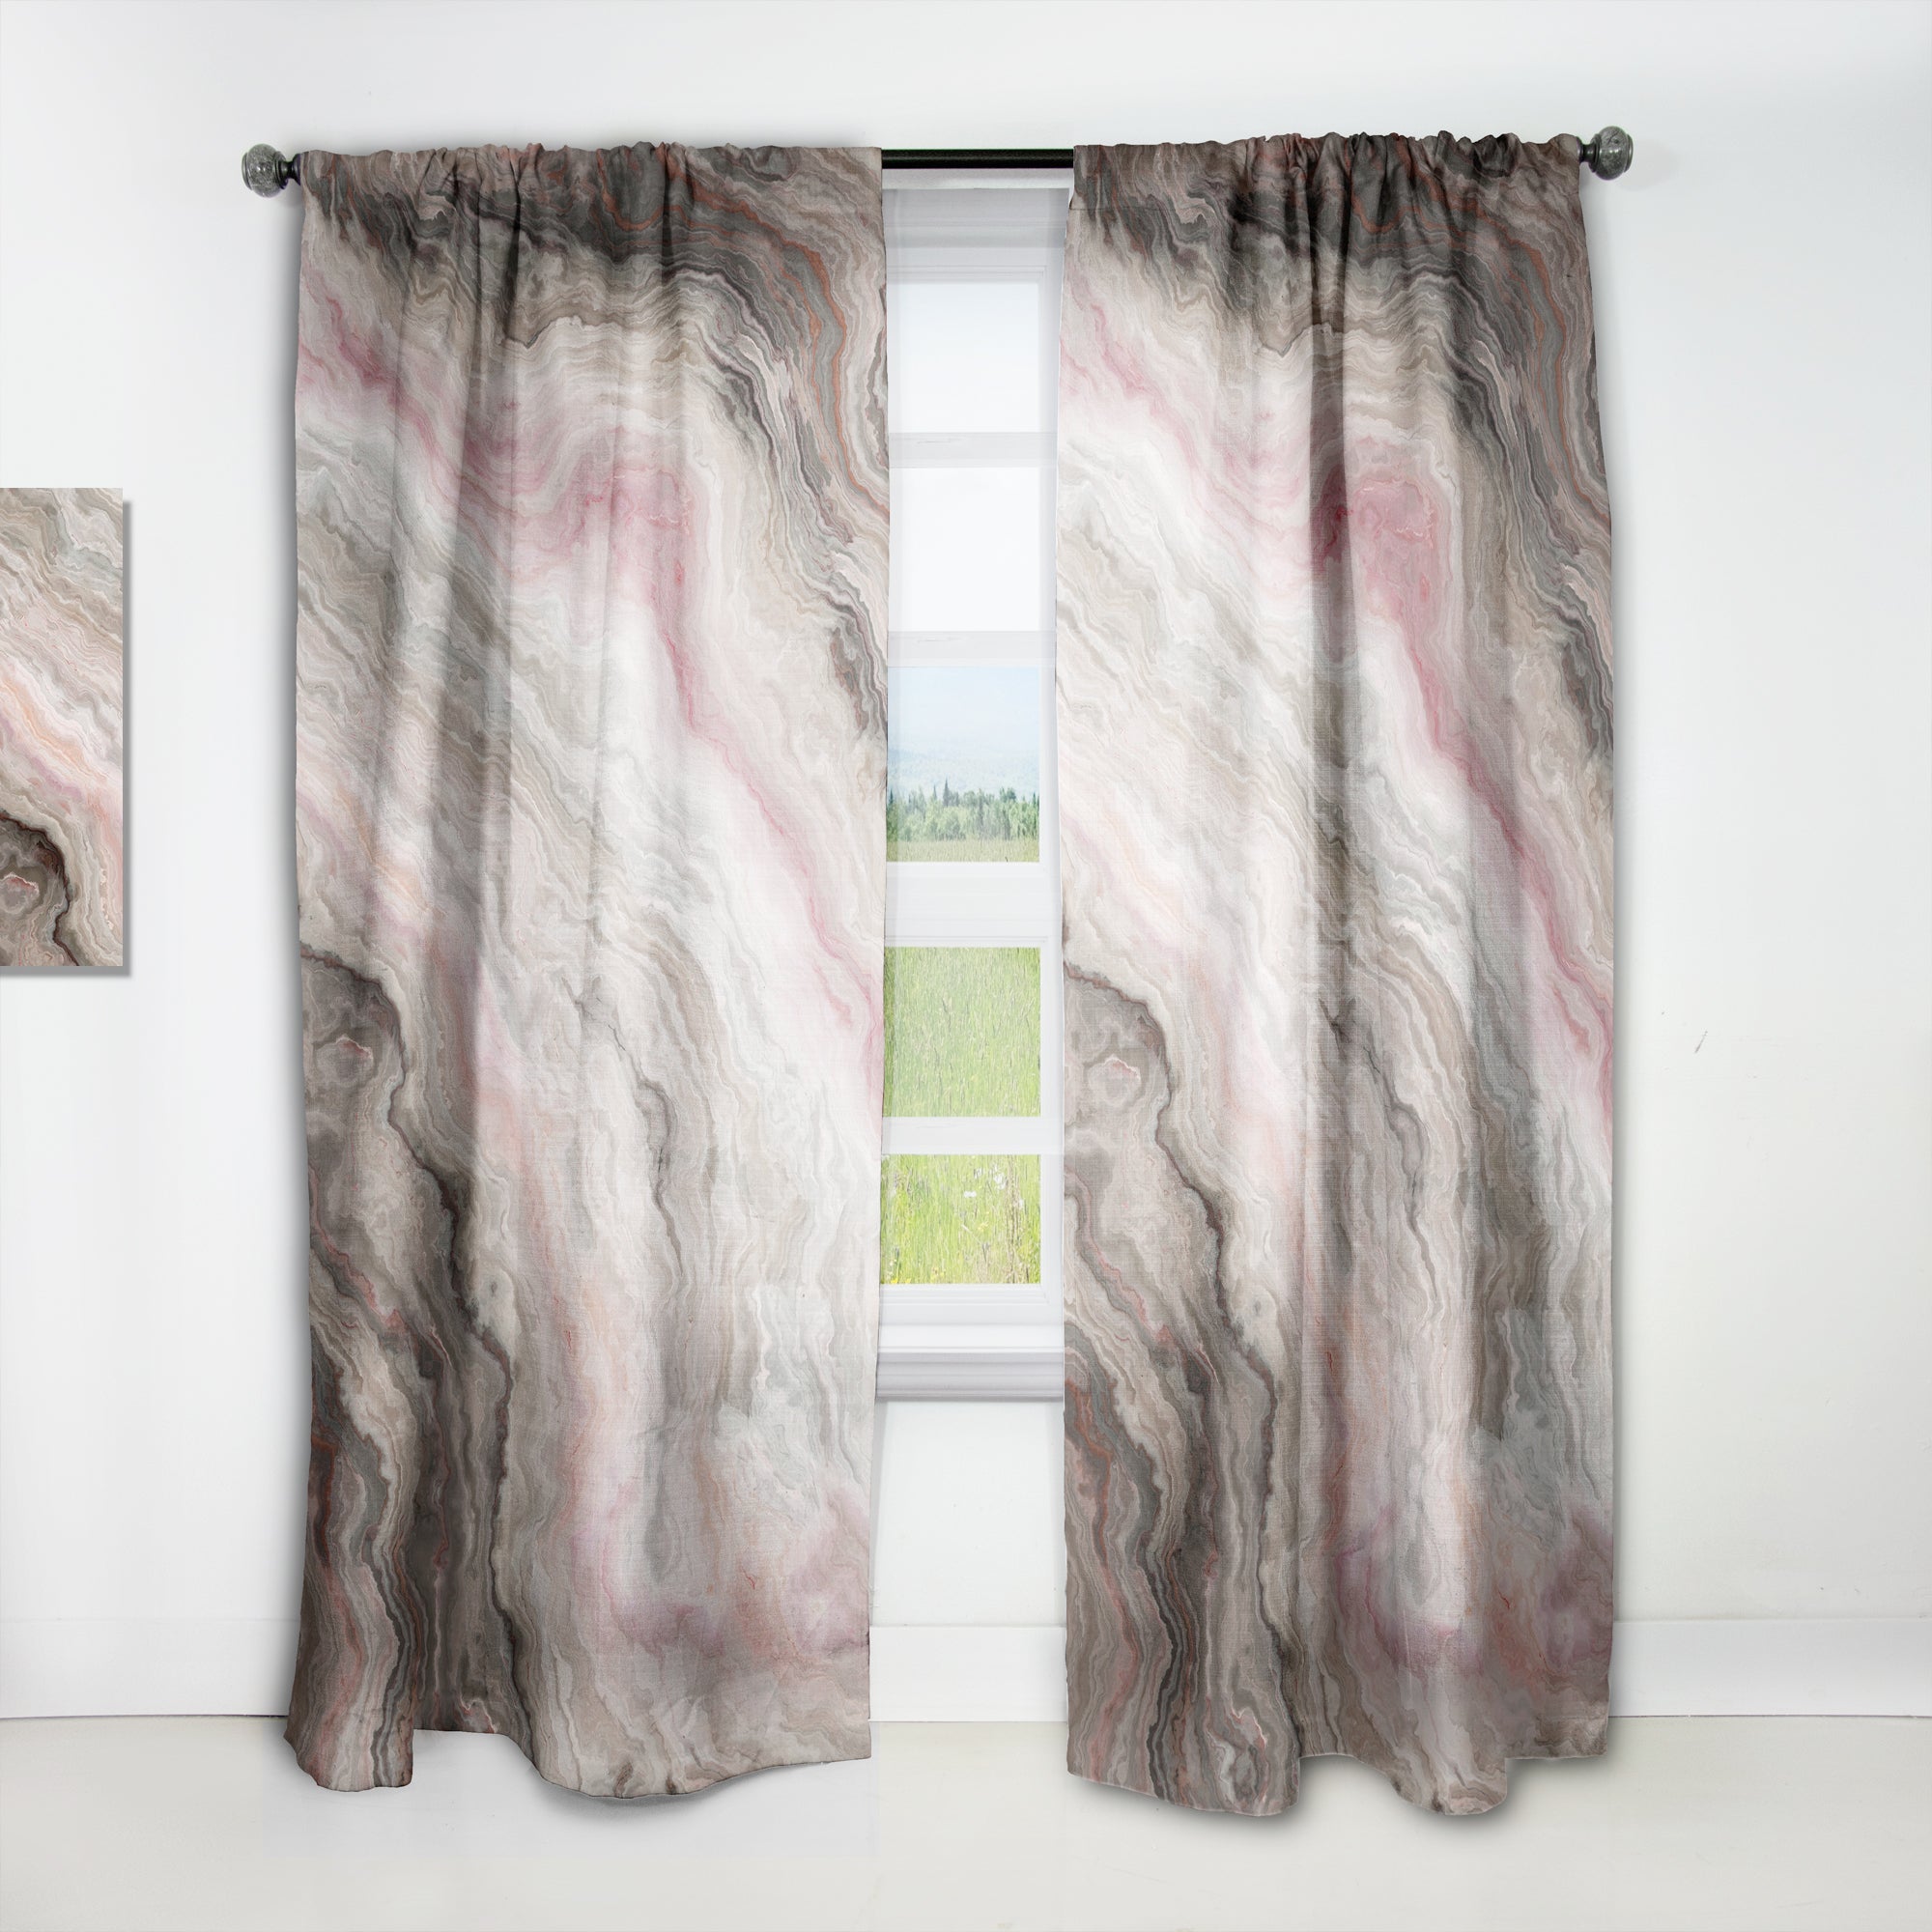 Designart 'Grey Onyx with Rose Inclusions' Mid-Century Modern Curtain Panel